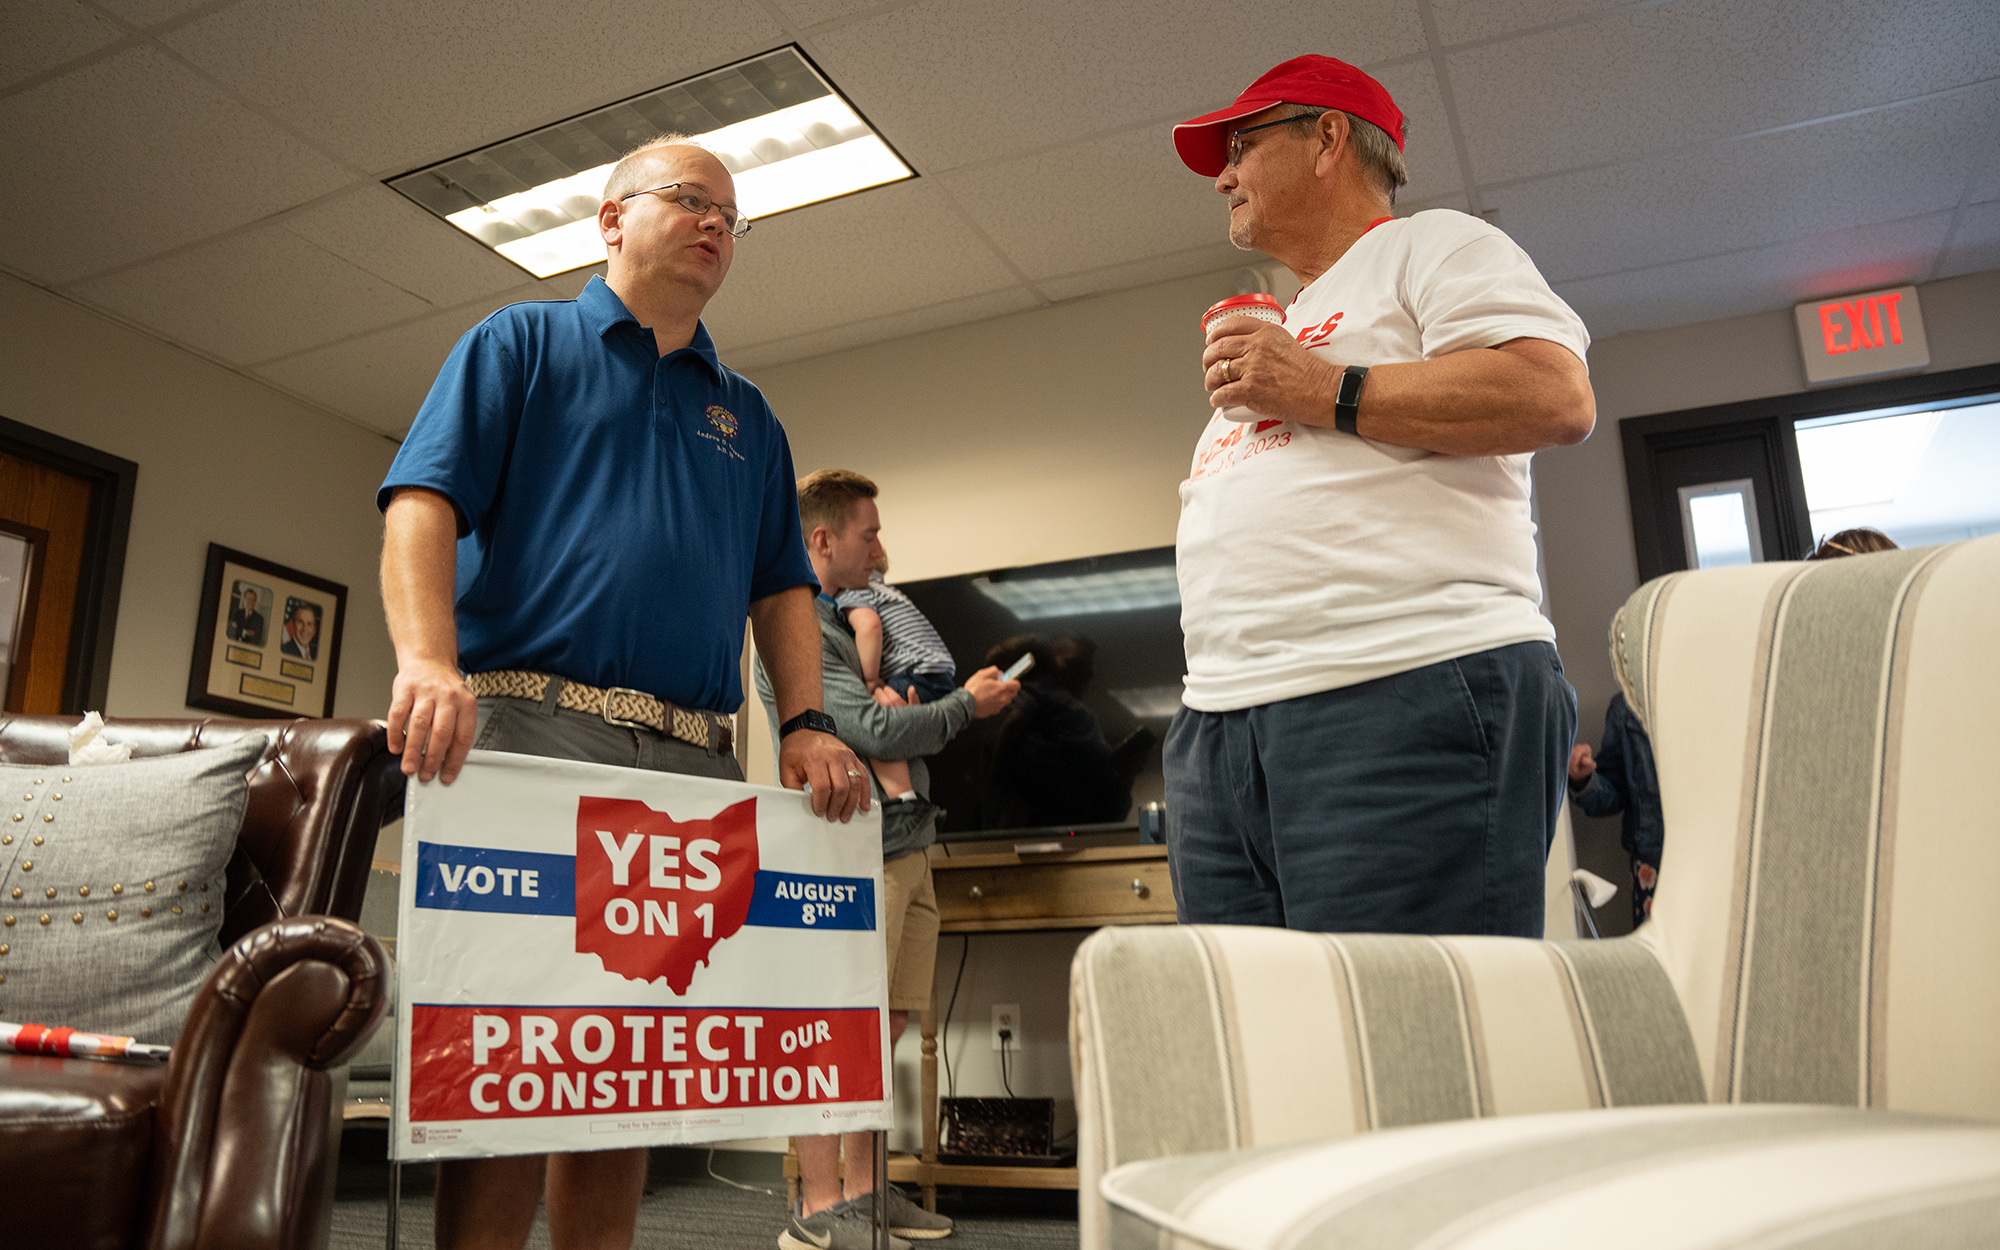 Ohio state Sen. Andrew Brenner, R-Delaware, left, speaks with resident Scott McVicker during a June 24, 2023, event at the GOP headquarters in Delaware, Ohio, to celebrate the anniversary of the Supreme Court decision that overturned Roe v. Wade. (Photo by Mingson Lau/News21)